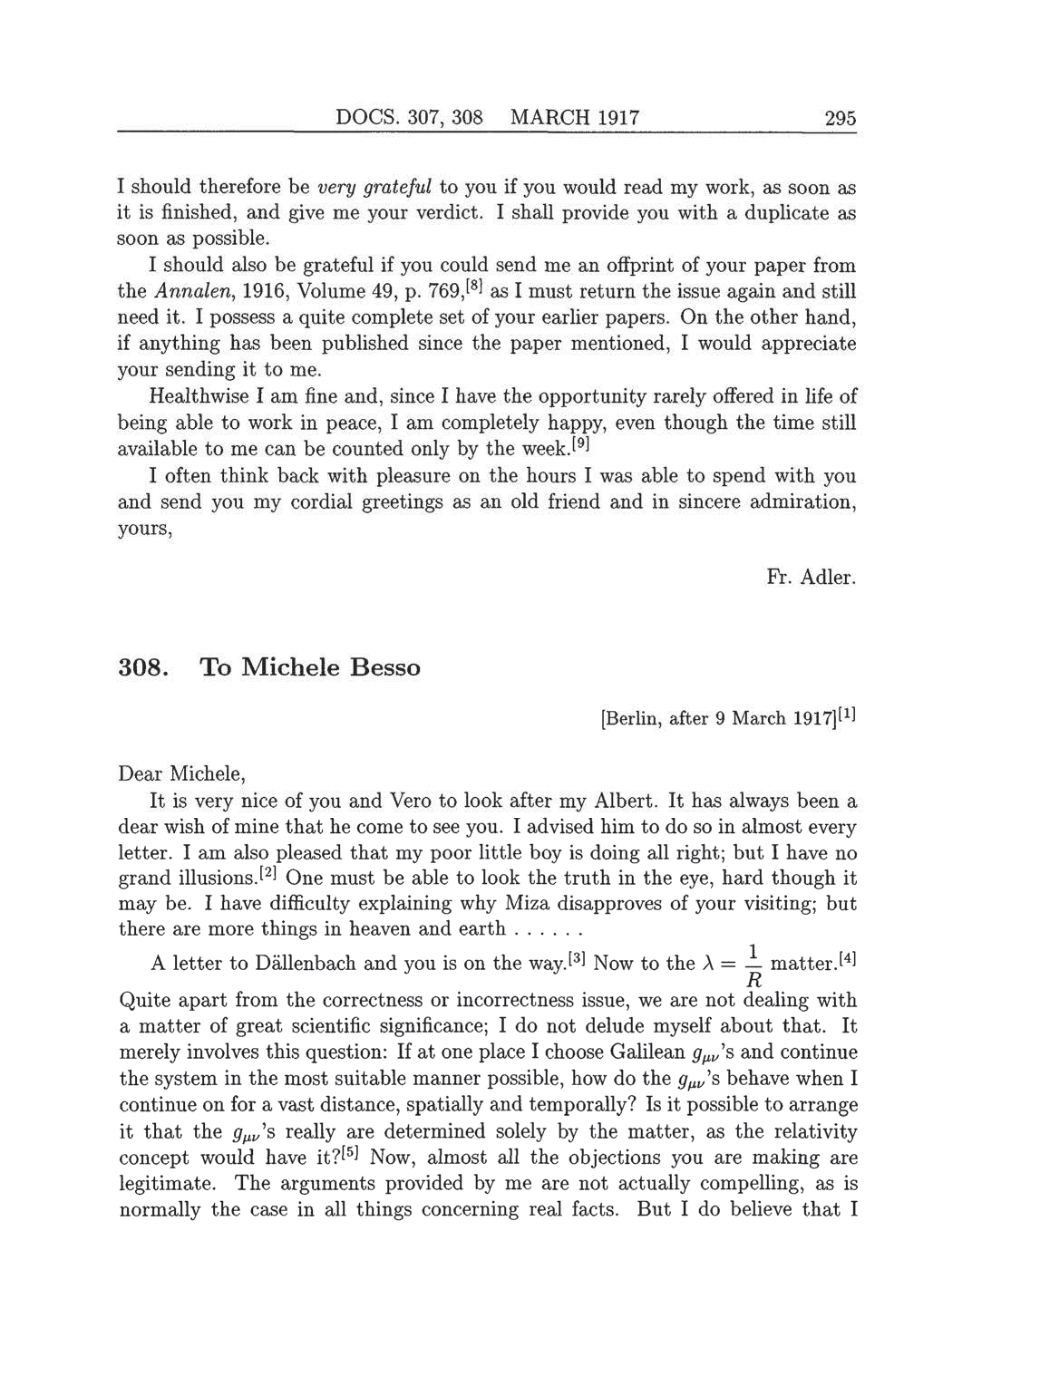 Volume 8: The Berlin Years: Correspondence, 1914-1918 (English translation supplement) page 295